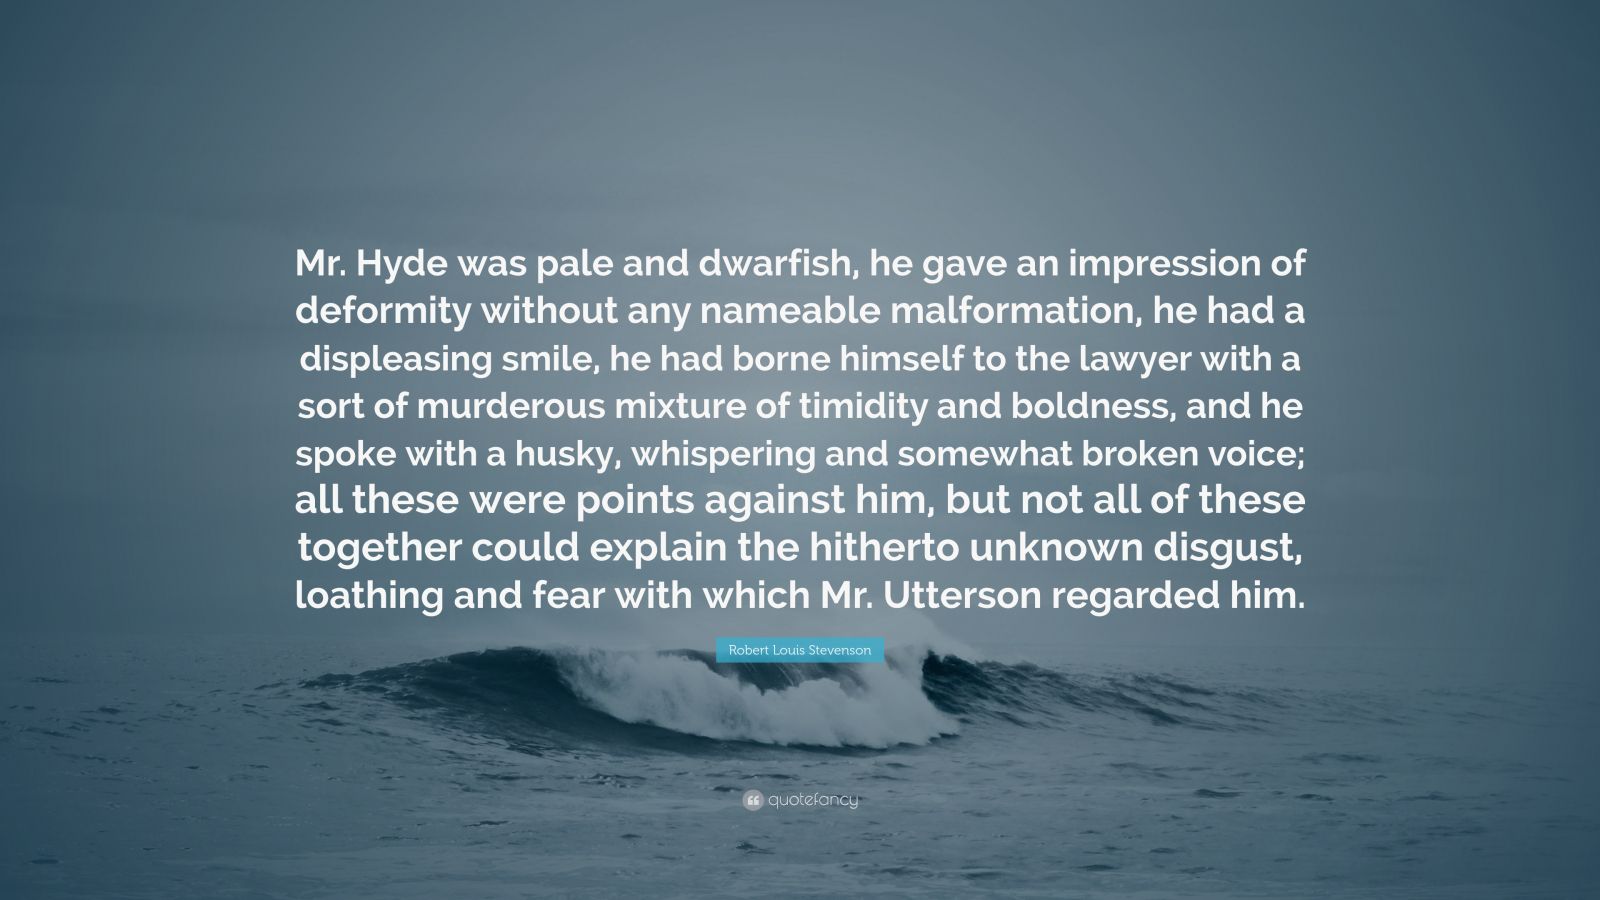 Robert Louis Stevenson Quote: “Mr. Hyde was pale and dwarfish, he gave